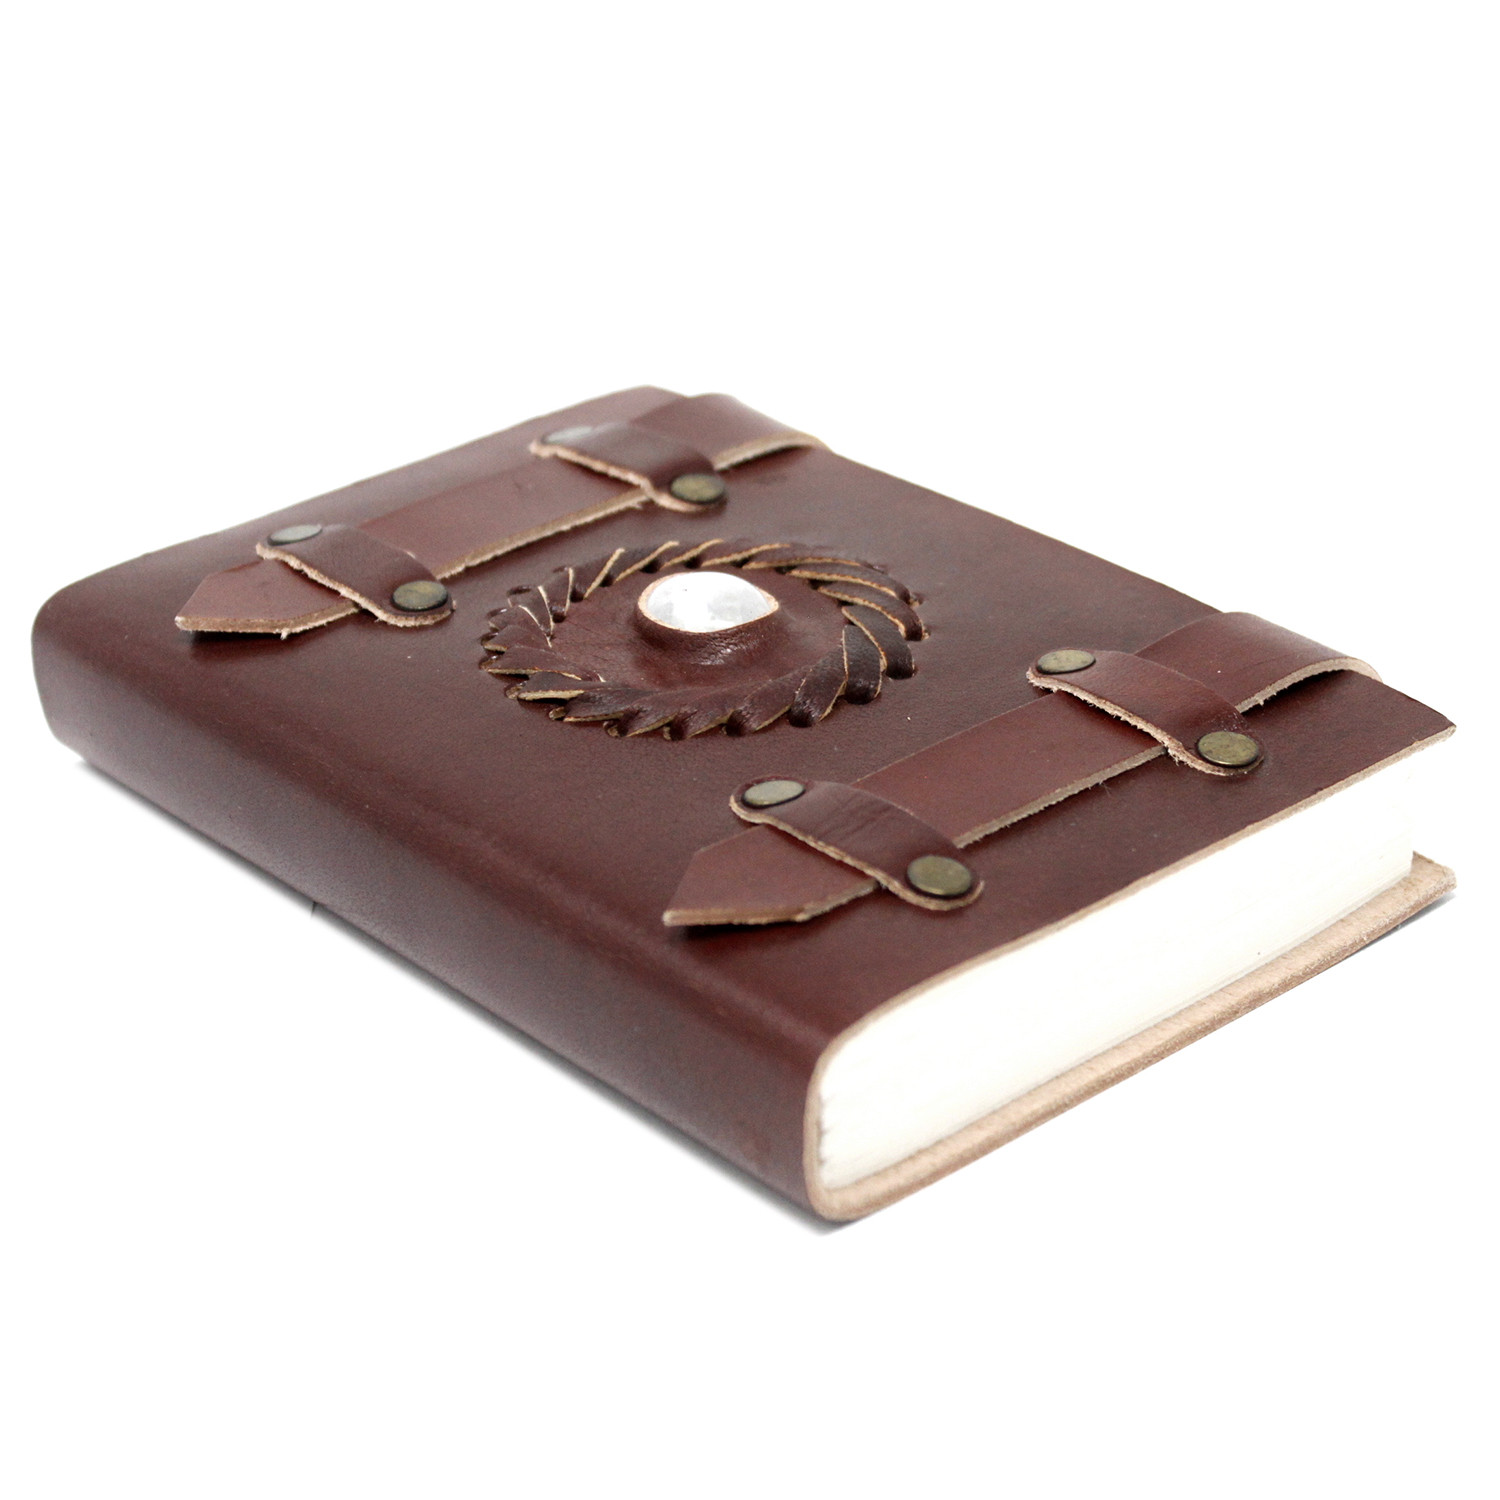 Leather notebook with Moonstone (6x4")